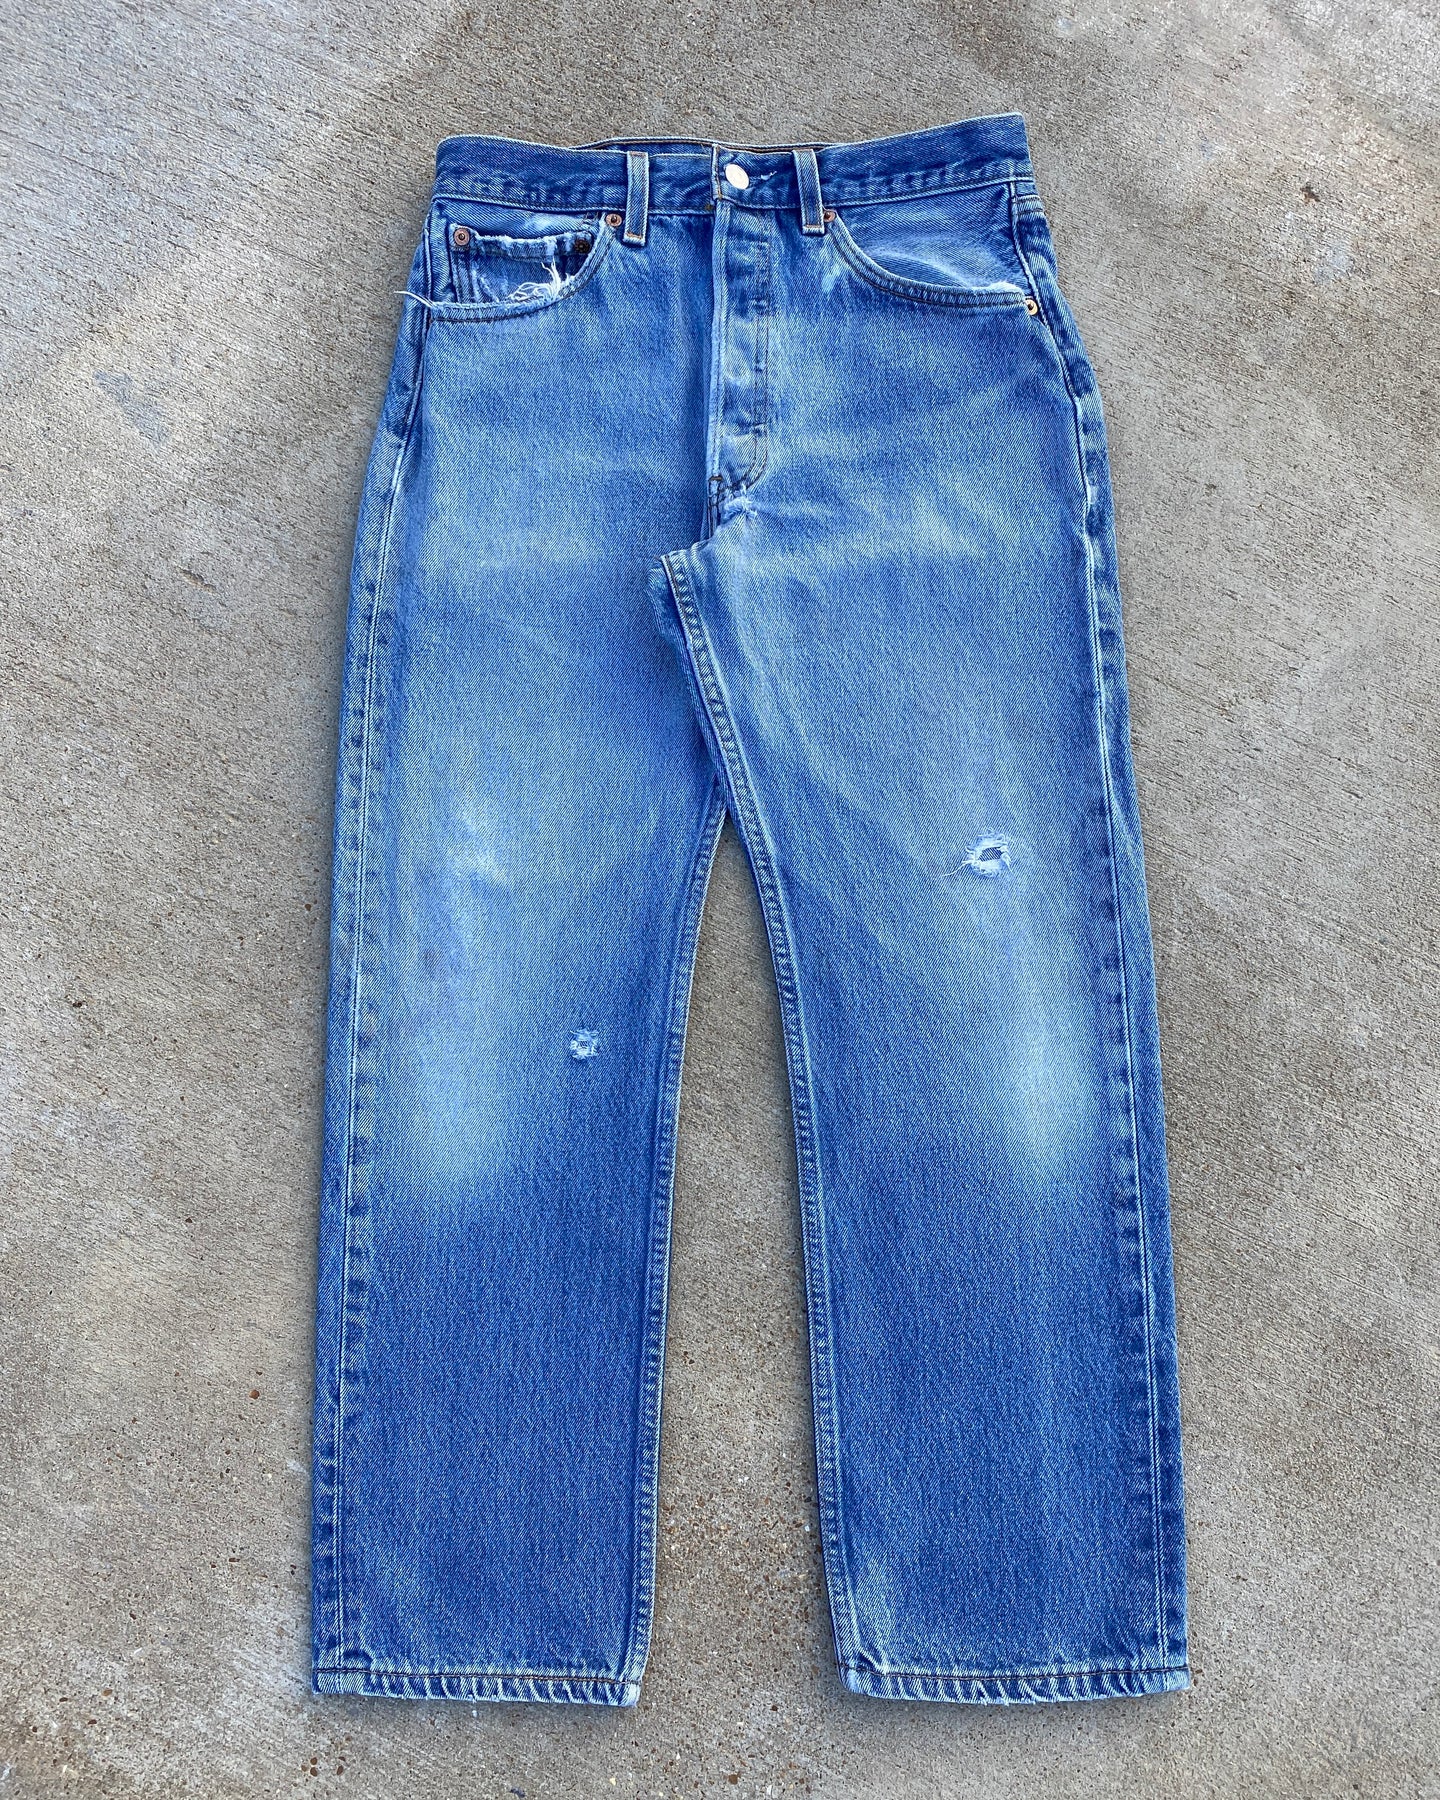 1990s Levi's Well Worn 501 - Size 29 x 28